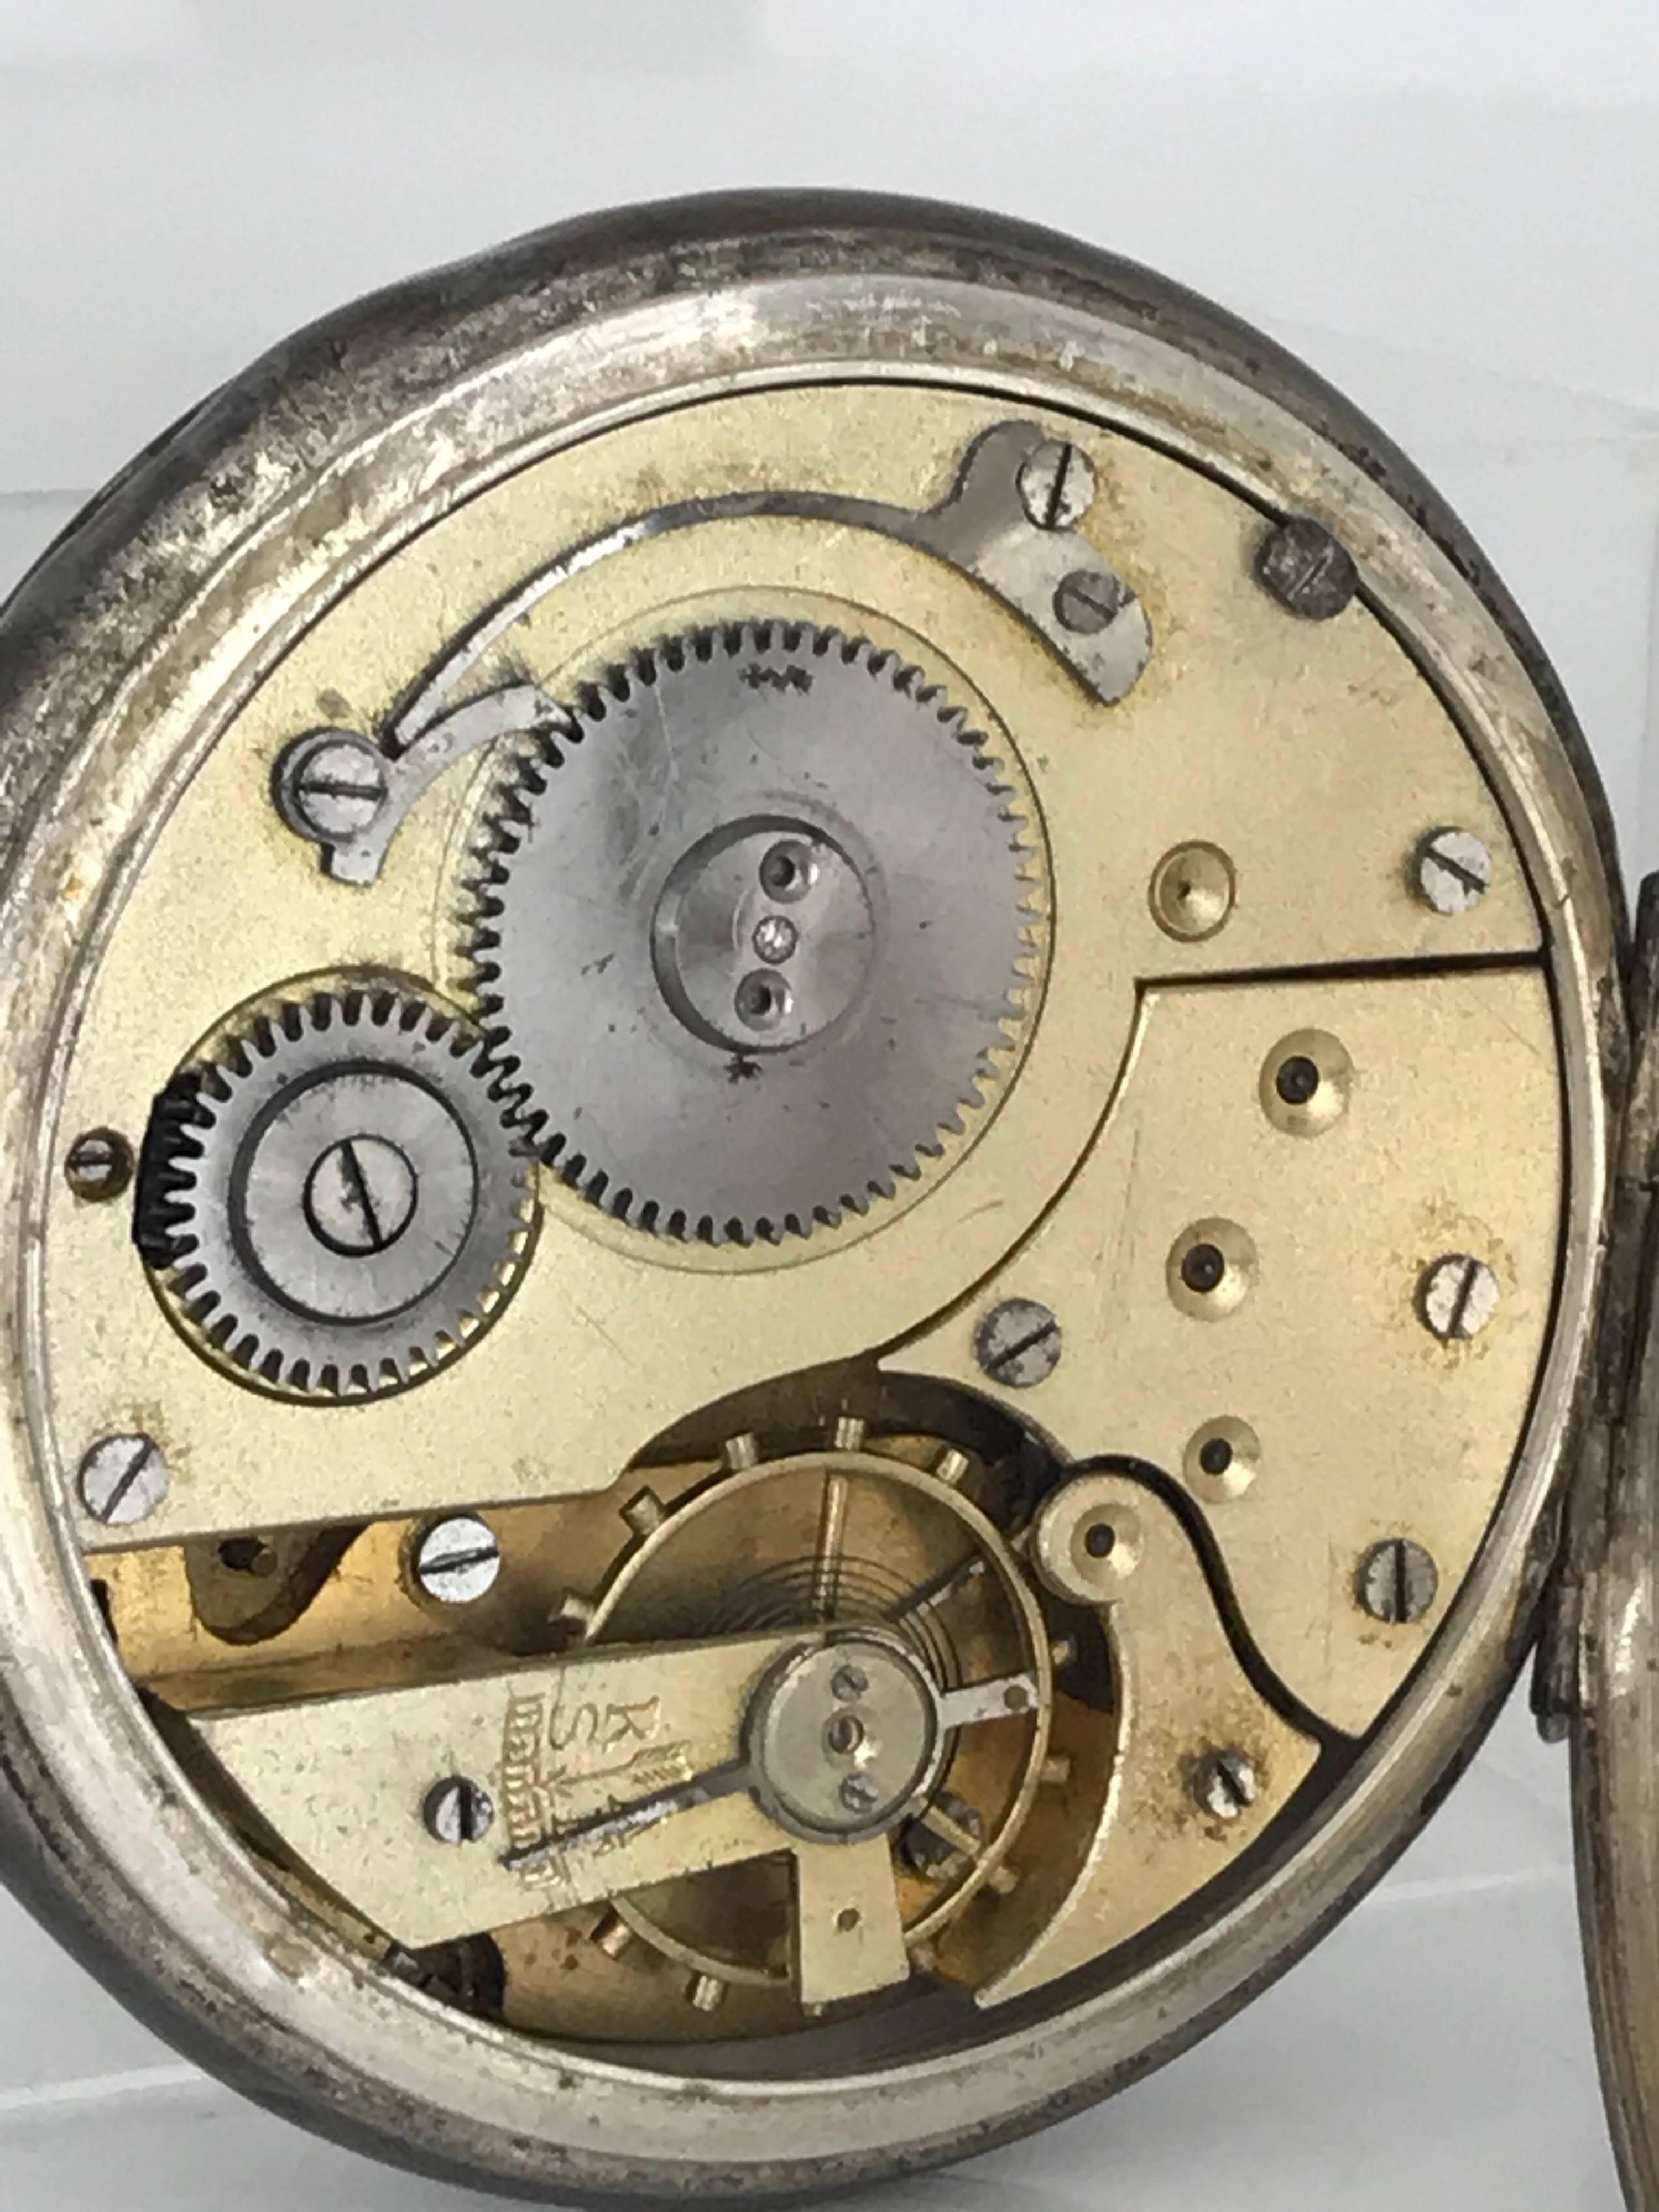 Sterling Silver Antique Pocketwatch Reguateur Veritable Echappement Roskopf Oversized Railroad Half Hunter

Very cool old estate watch with a round white ceramic face, roman numerals and a 2nd hand dial.

Back of watch features a magnificently